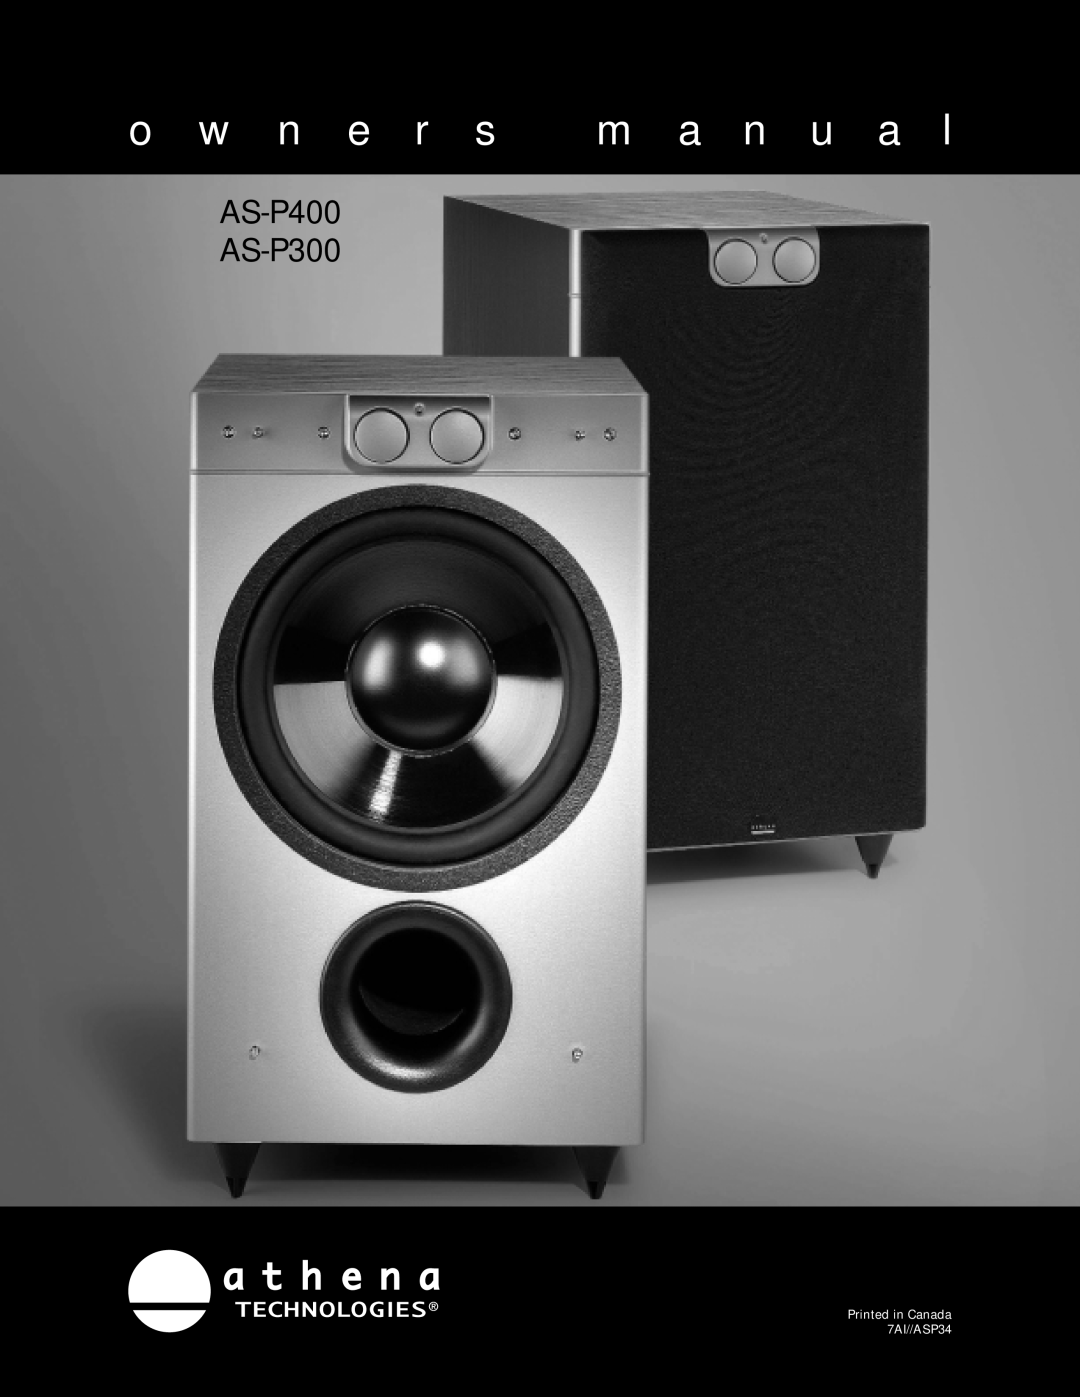 Athena Technologies S.5, C.5, AS-P400, AS-P300 specifications POINT 5 MKII, athena TECHNOLOGIES, Create your sound 